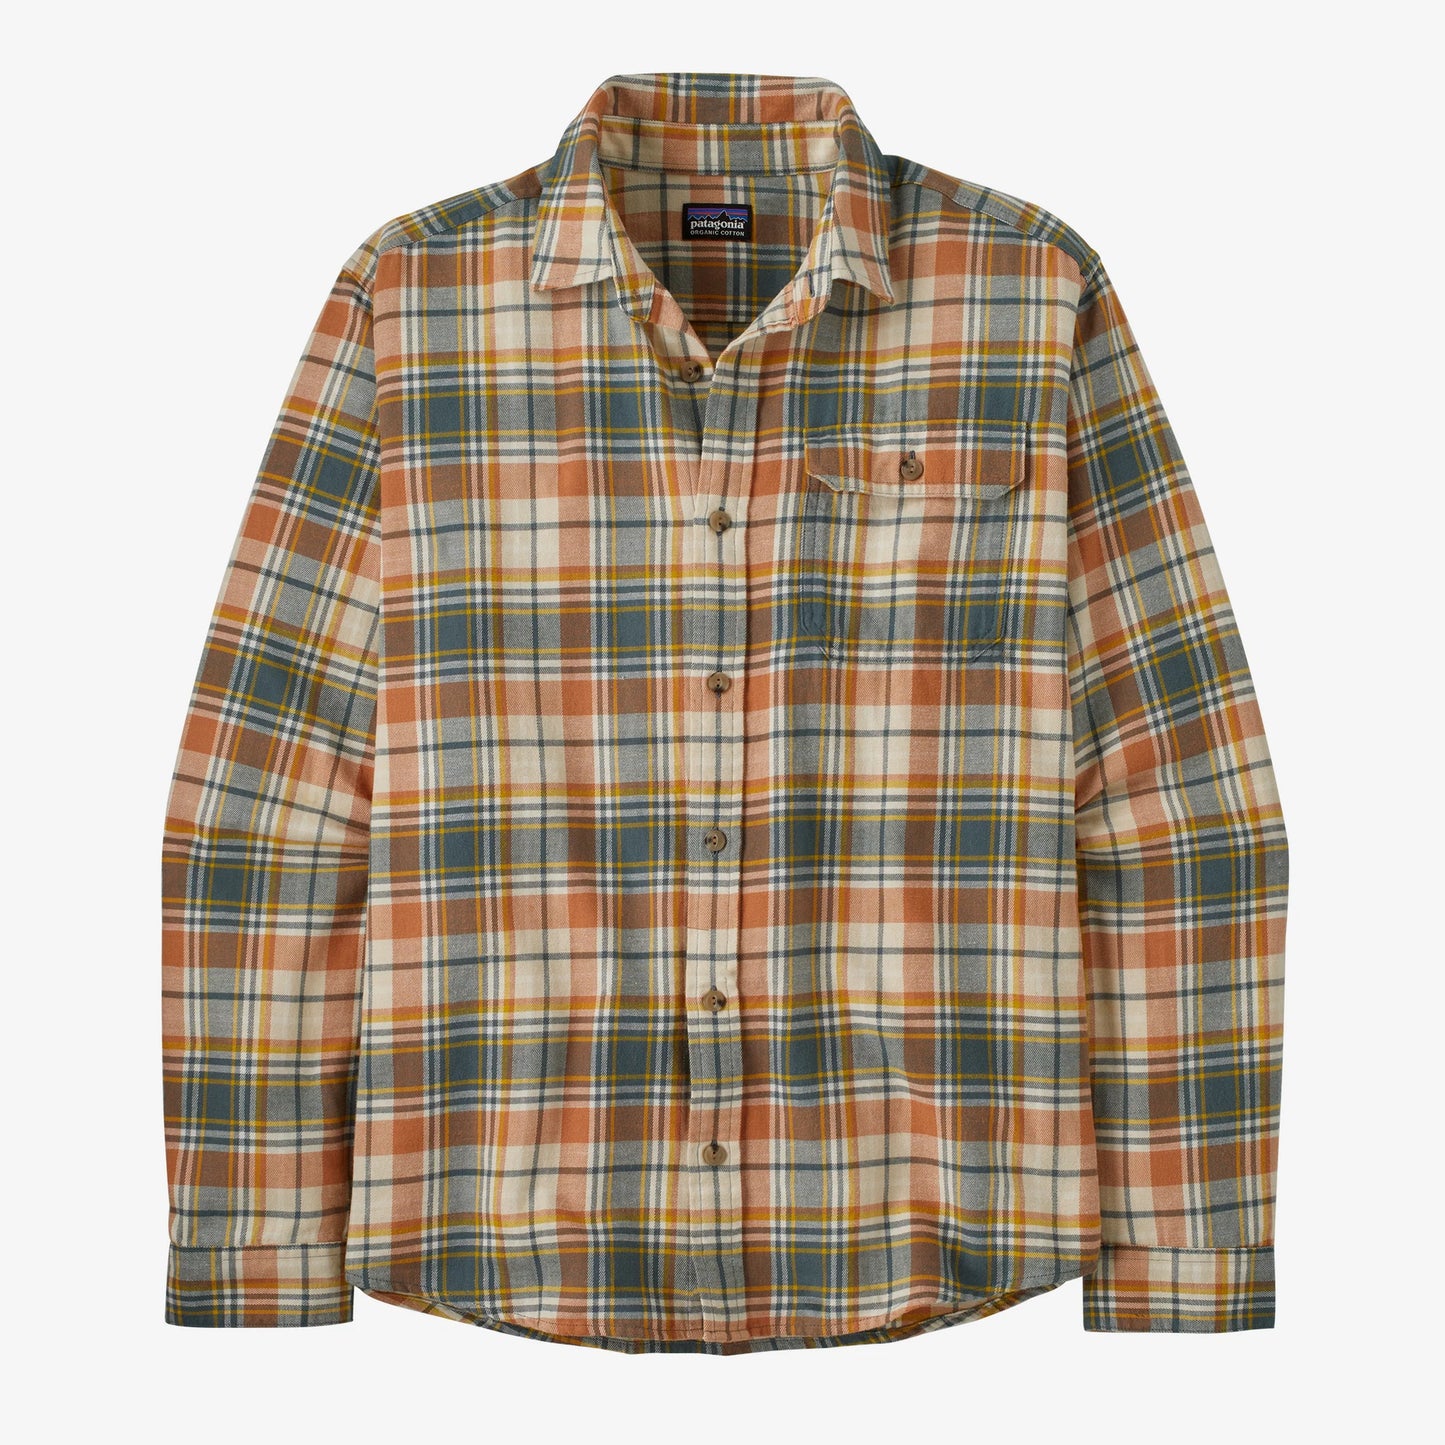 Patagonia M'S L/S Cotton in Conversion LW Flannel Shirt - Star Surf + Skate